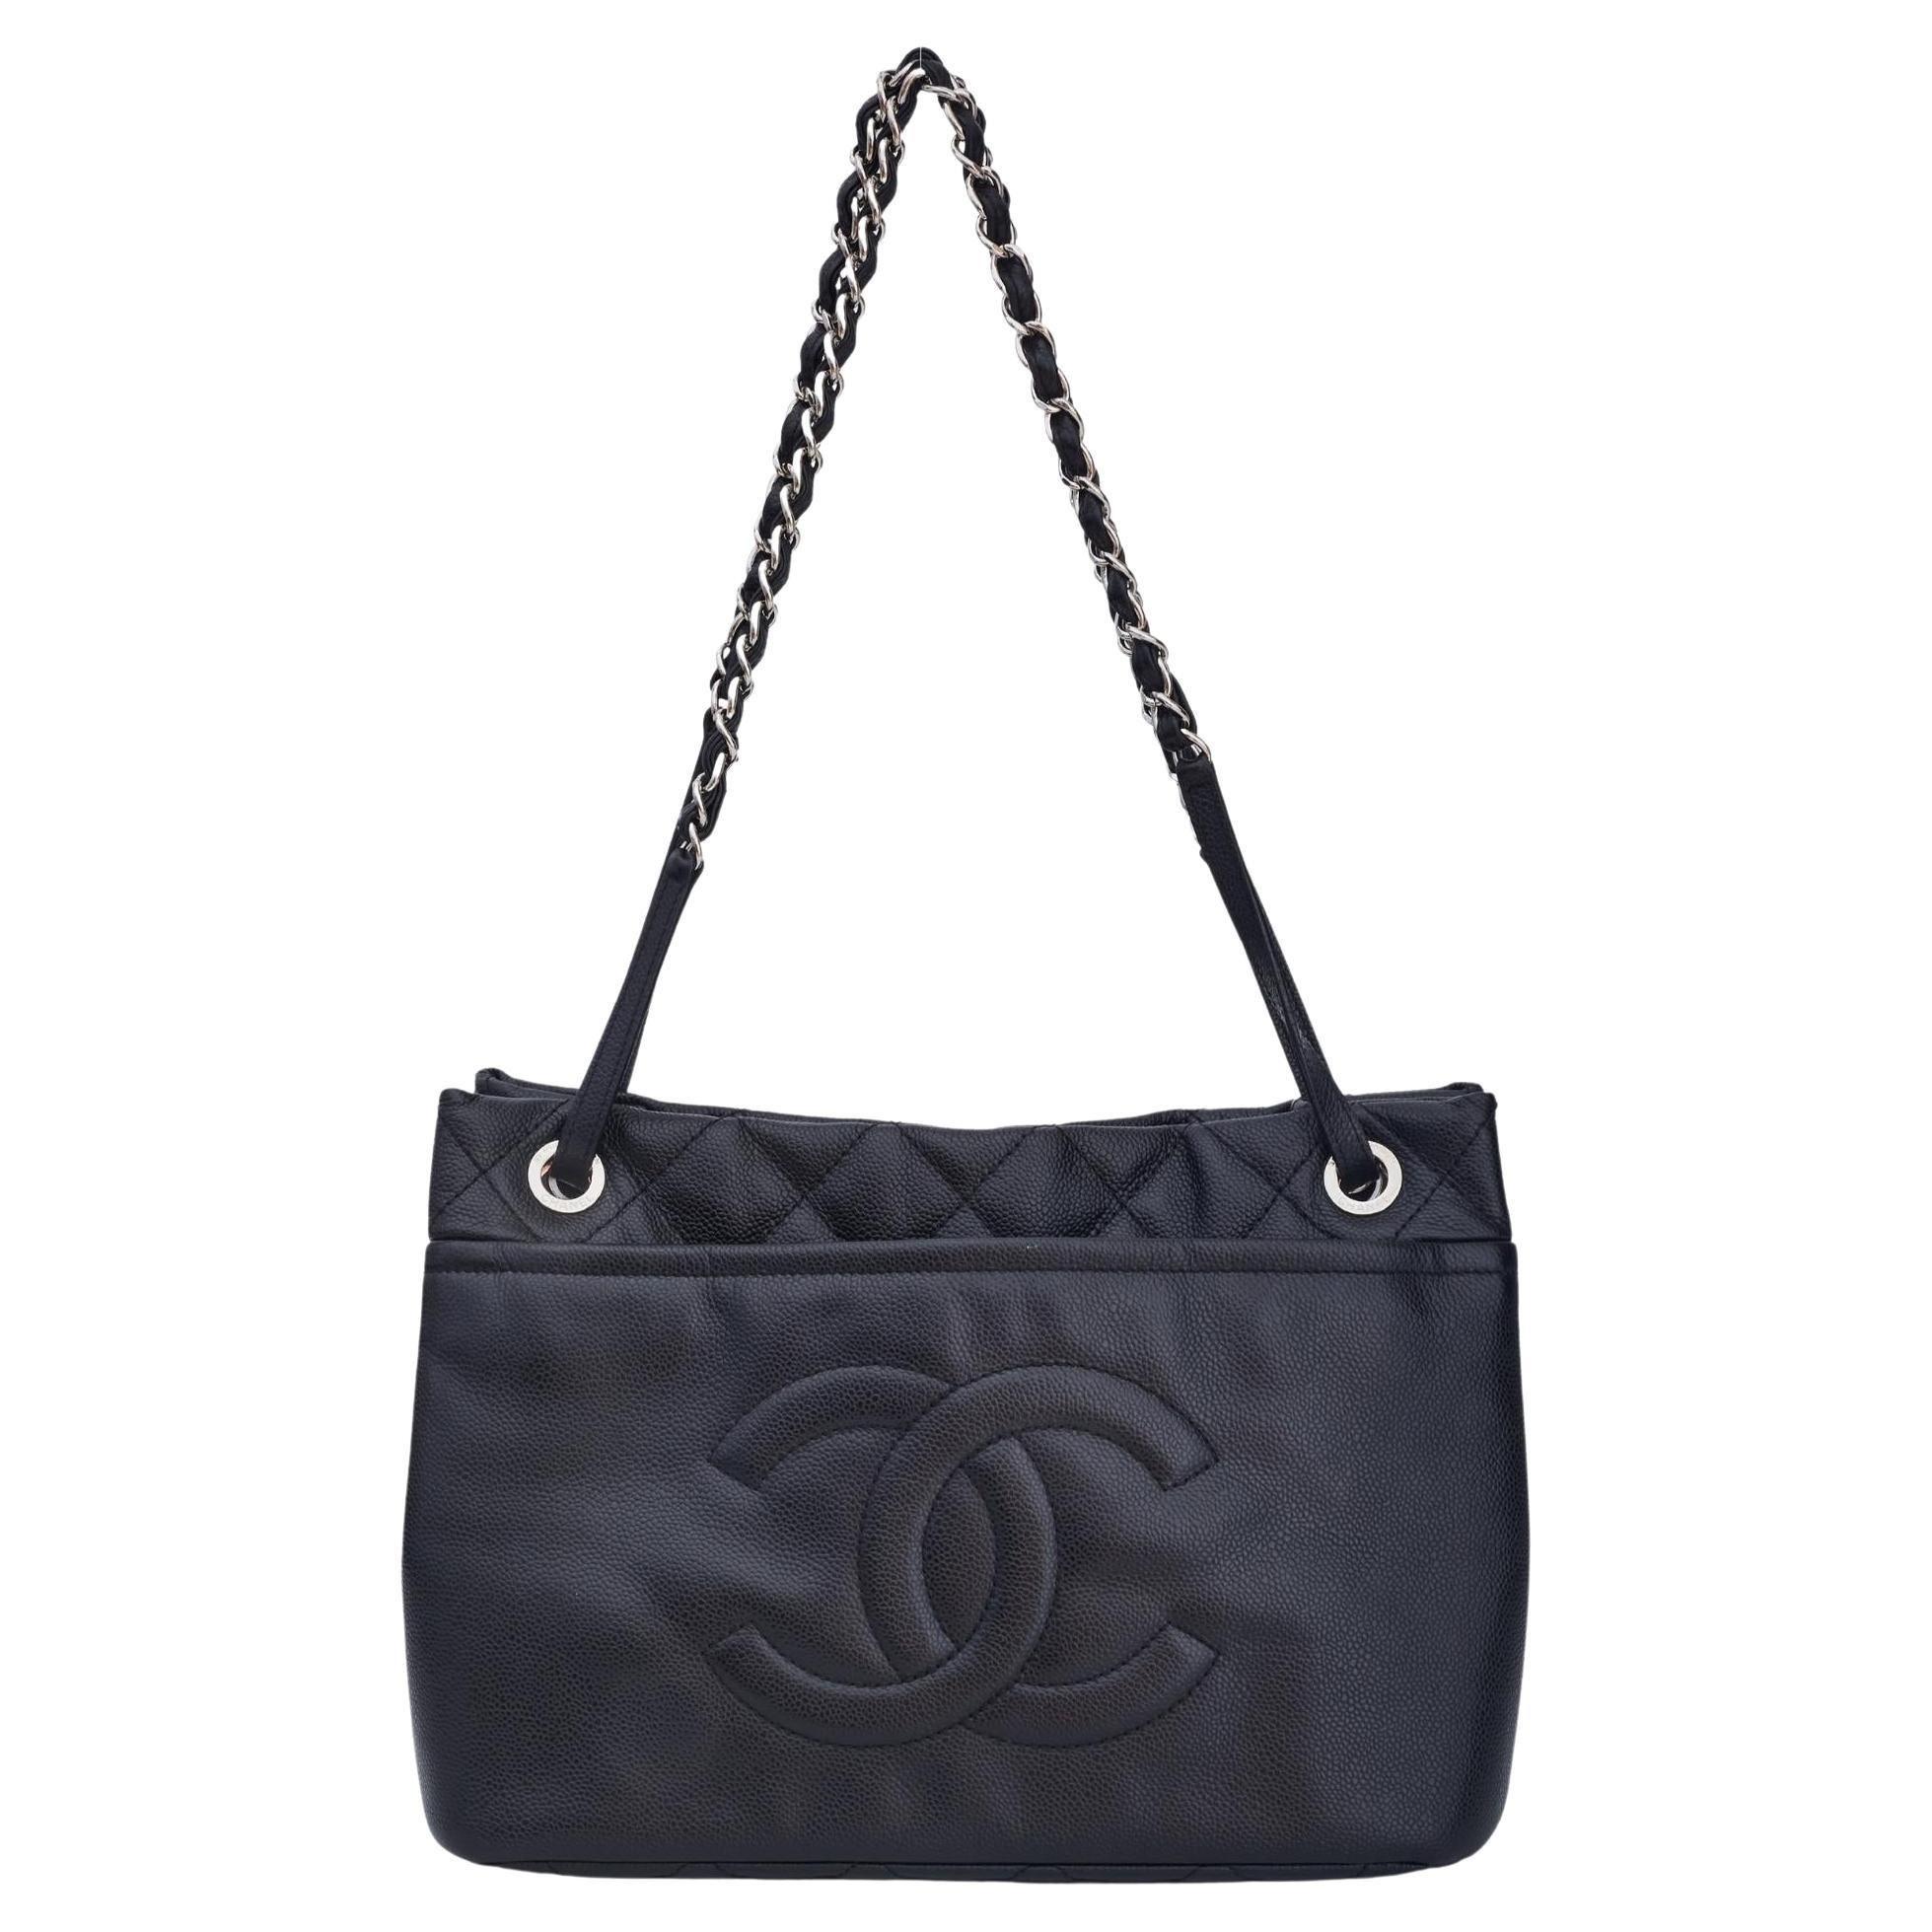 Chanel Vintage Caviar Black Leather Grand Shopping Tote Medium (2015) For Sale